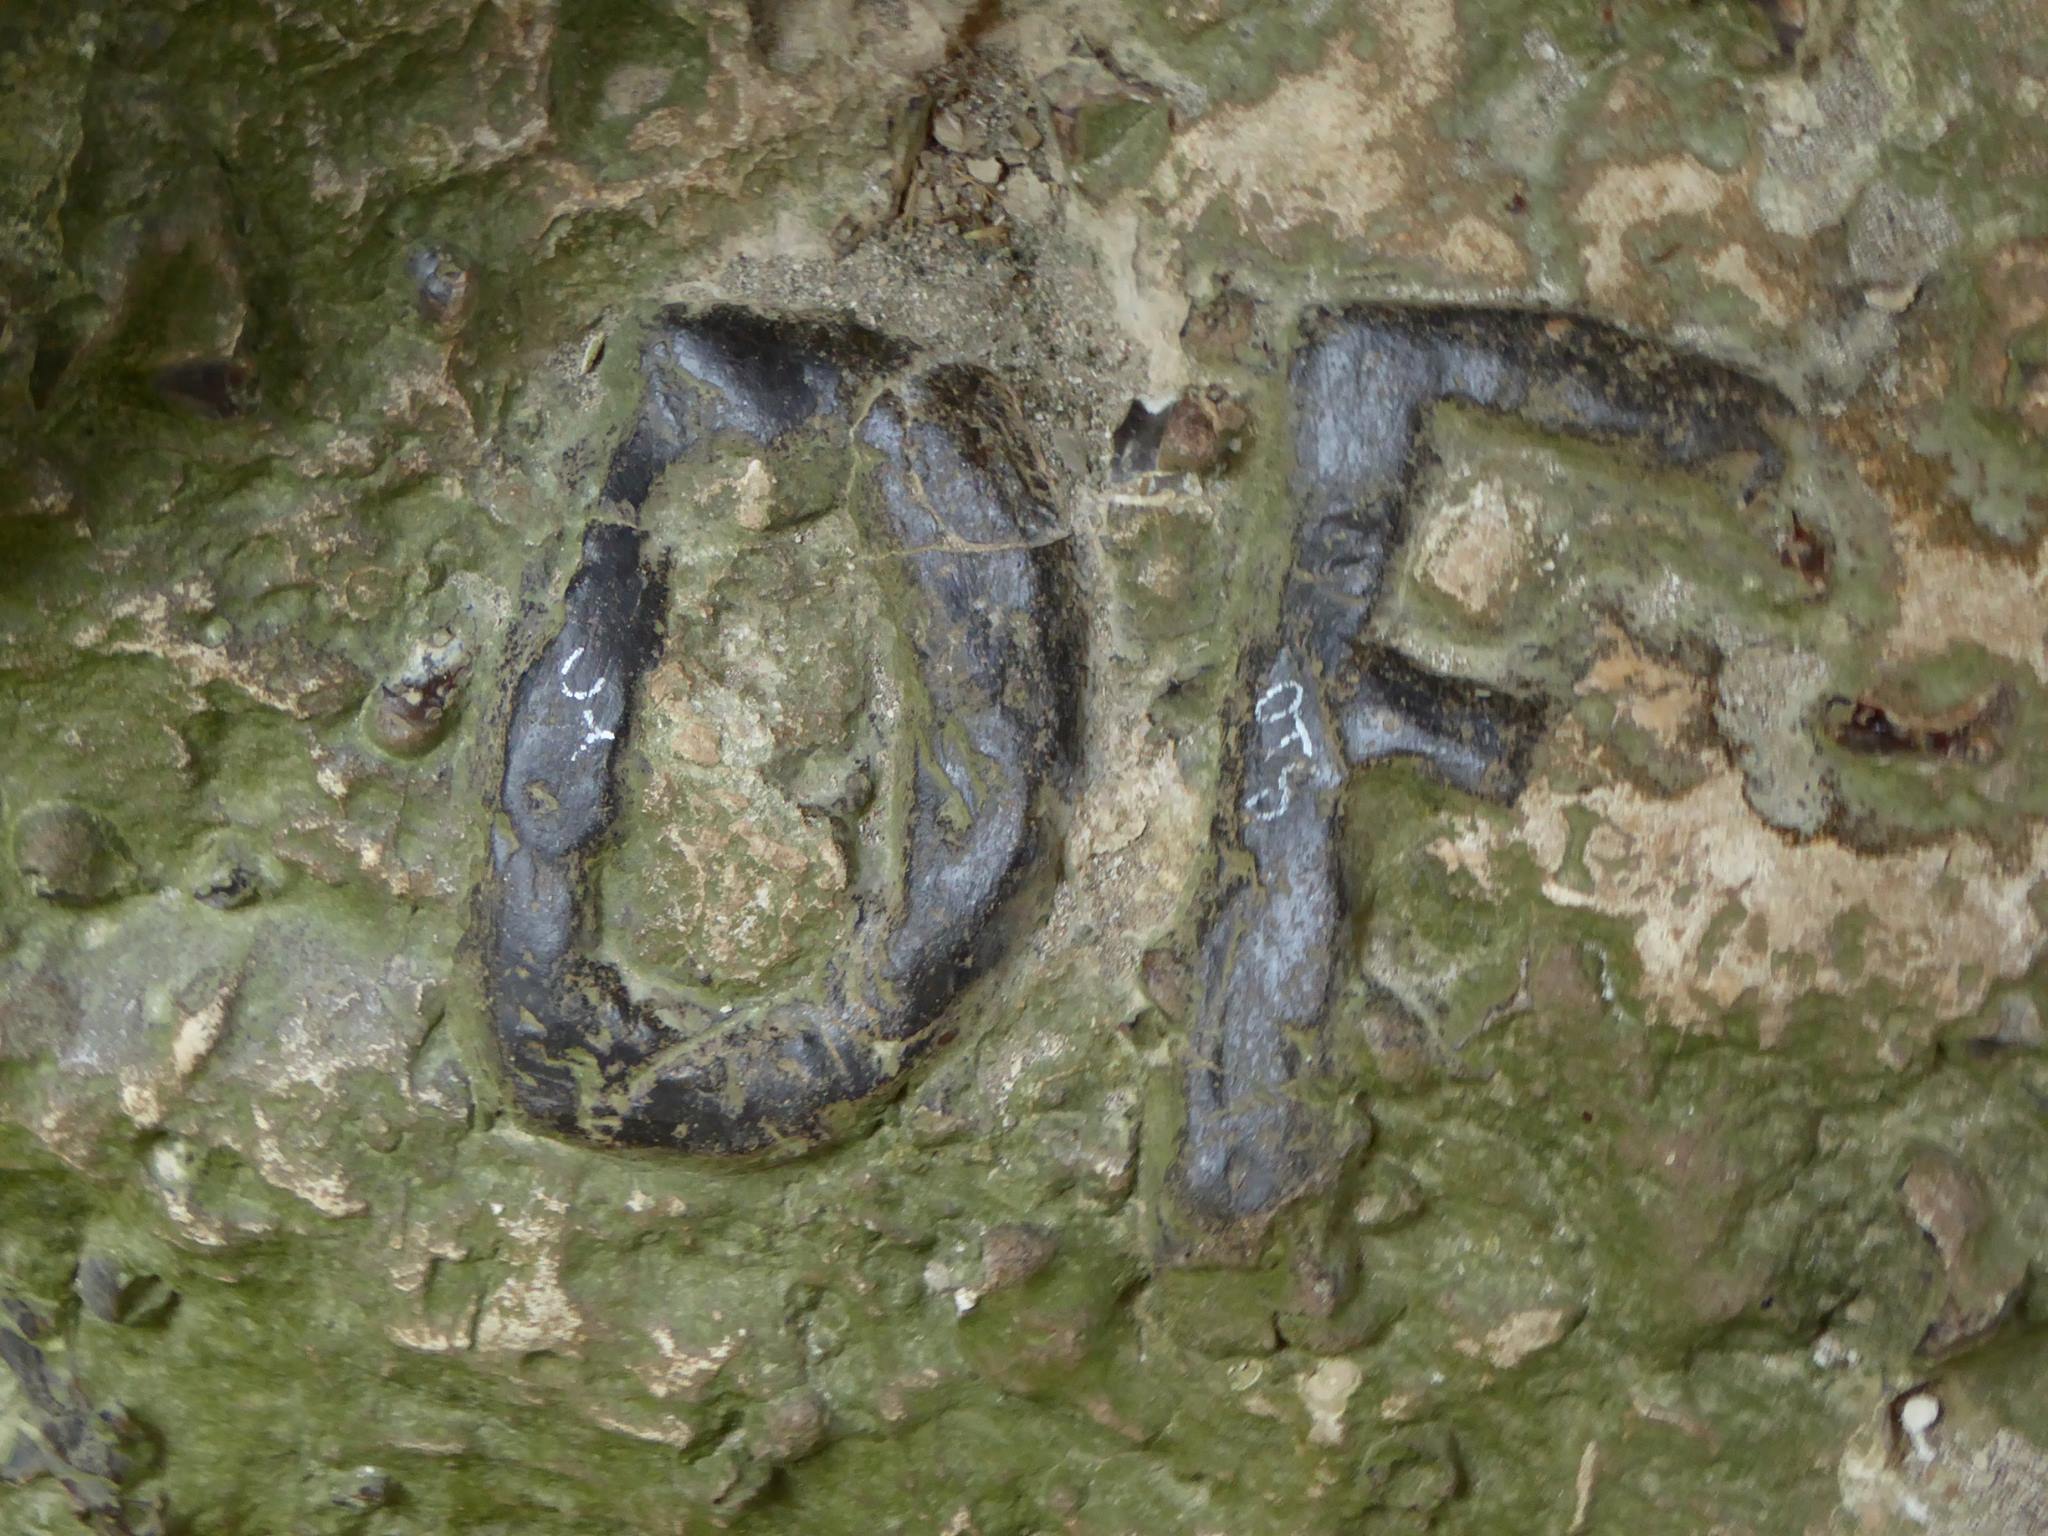 These are my initials, but I did NOT deface this cliff!